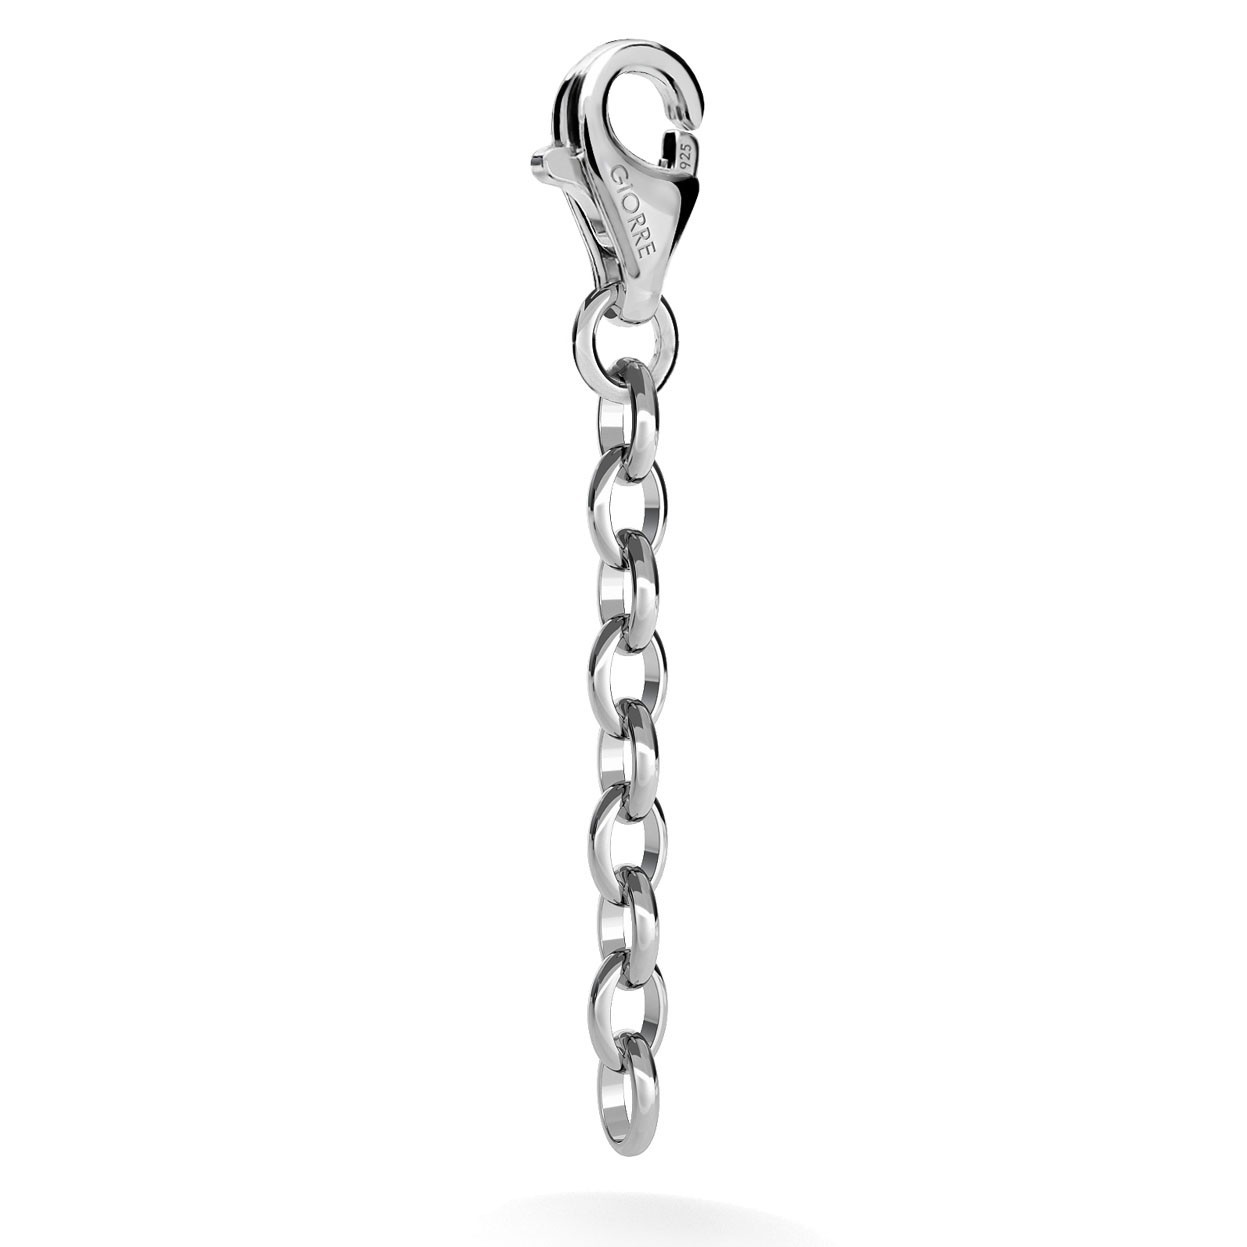 40 MM EXTENSION TO CHARMS GIORRE, STERLING SILVER (925) RHODIUM OR GOLD PLATED